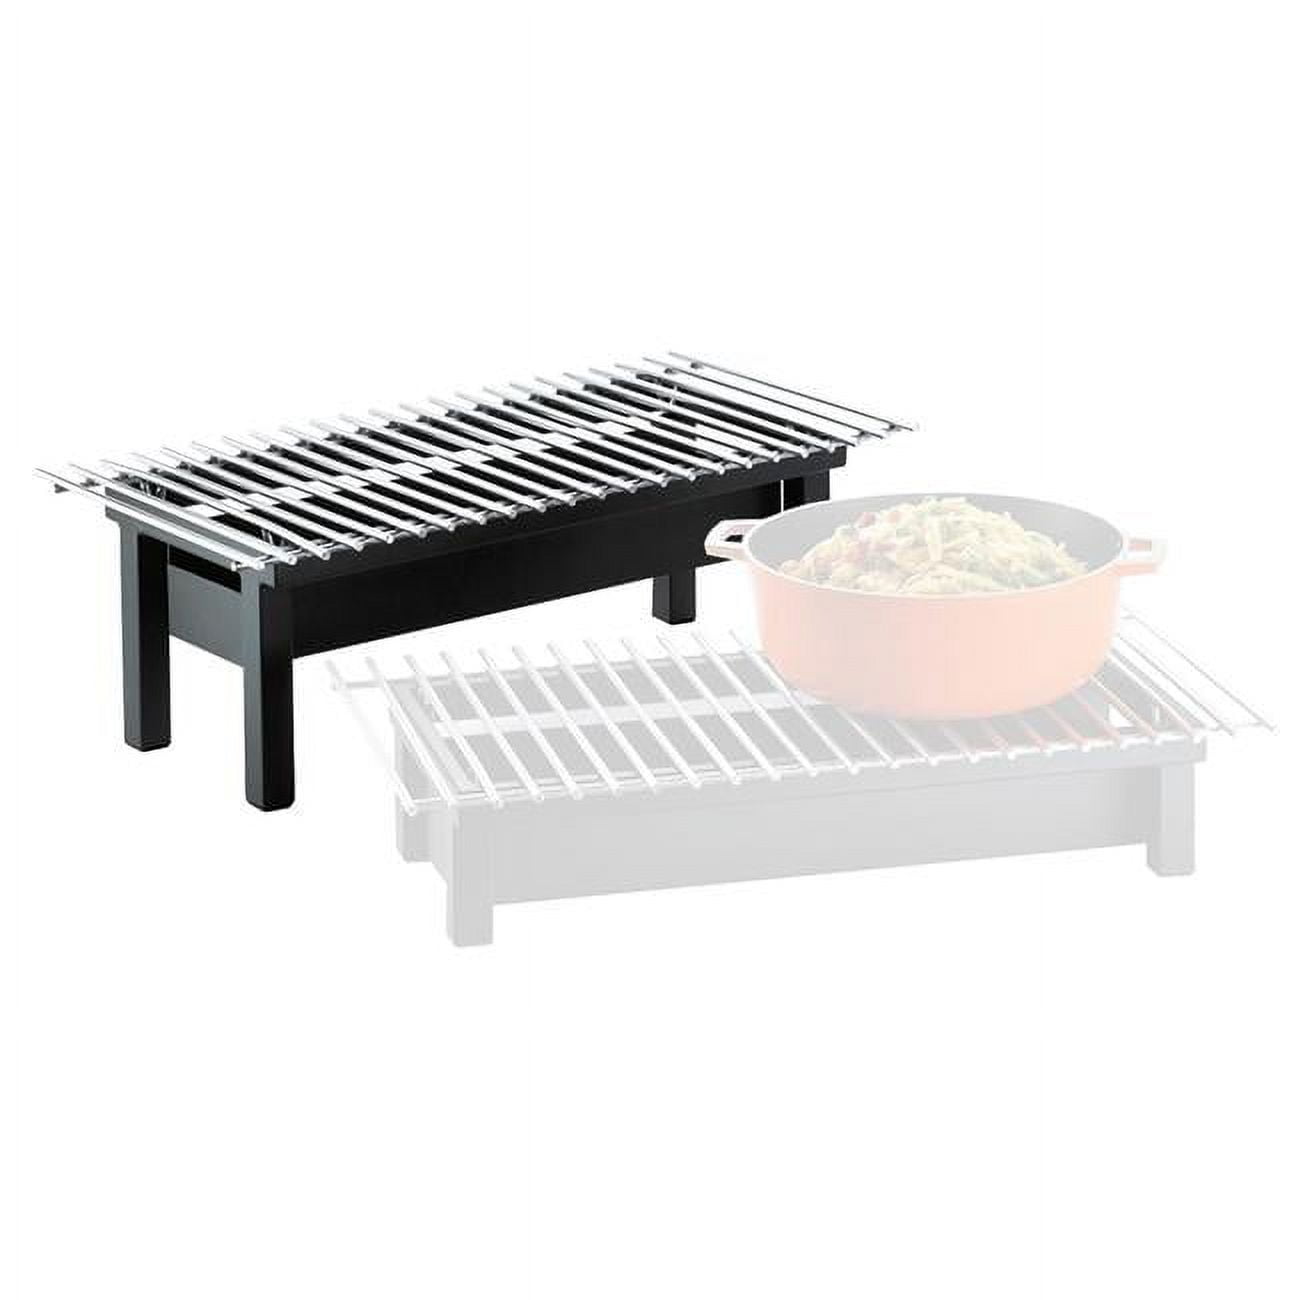 Picture of Cal Mil 1409-22-13 One by One Chafer Griddle, Black - 22 x 12 x 7 in.